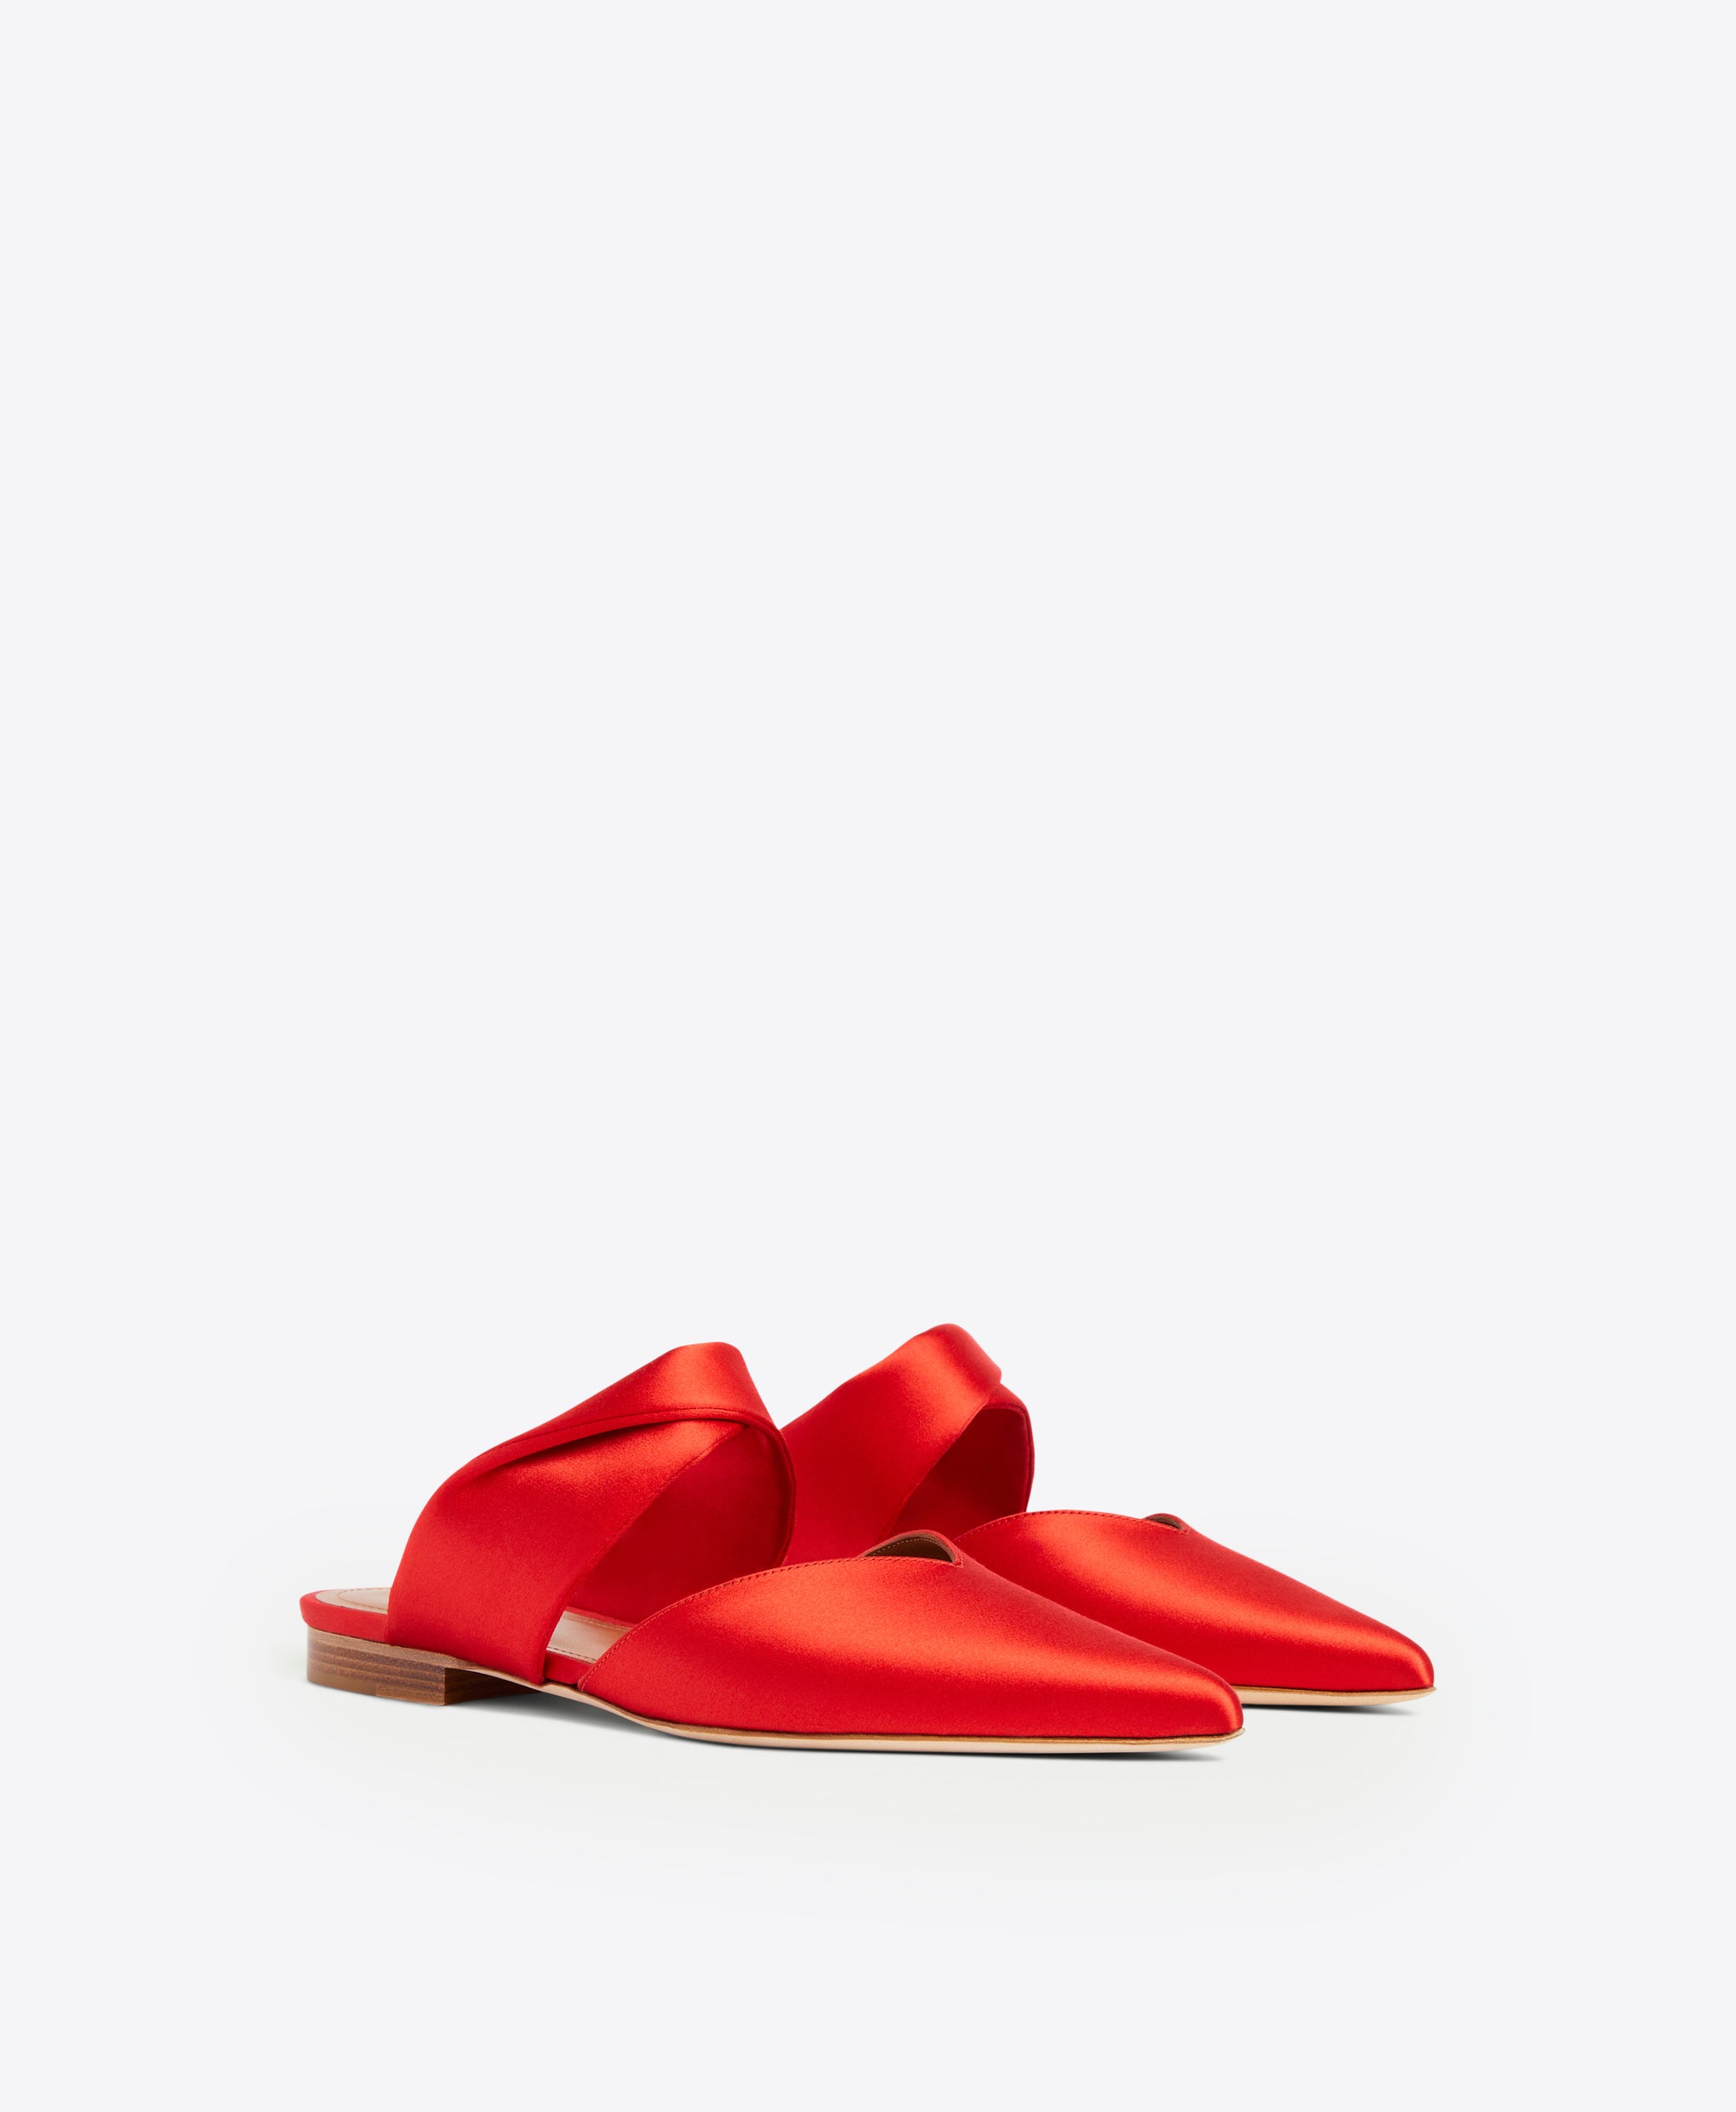 Malone Souliers Maisie Red Satin Flat Mules